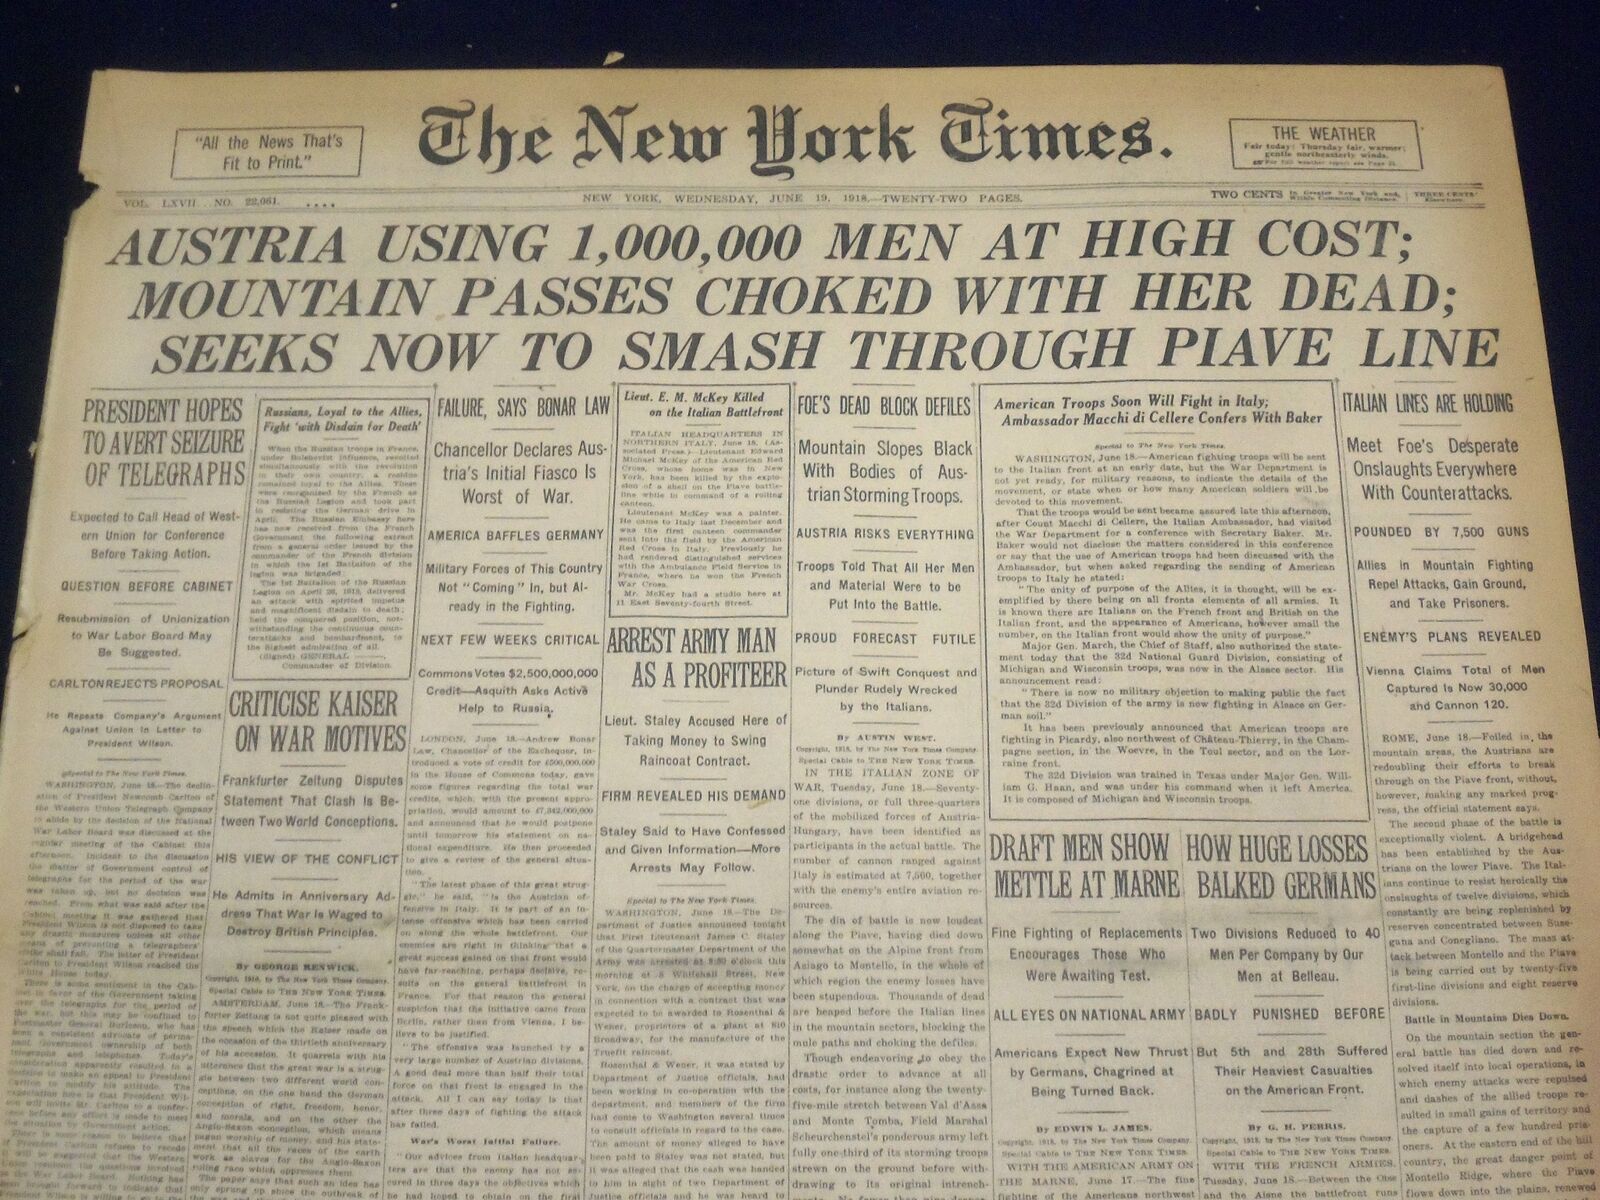 1918 JUNE 19 NEW YORK TIMES - AUSTRIA USING 1,000,000 MEN AT HIGH COST - NT 9101